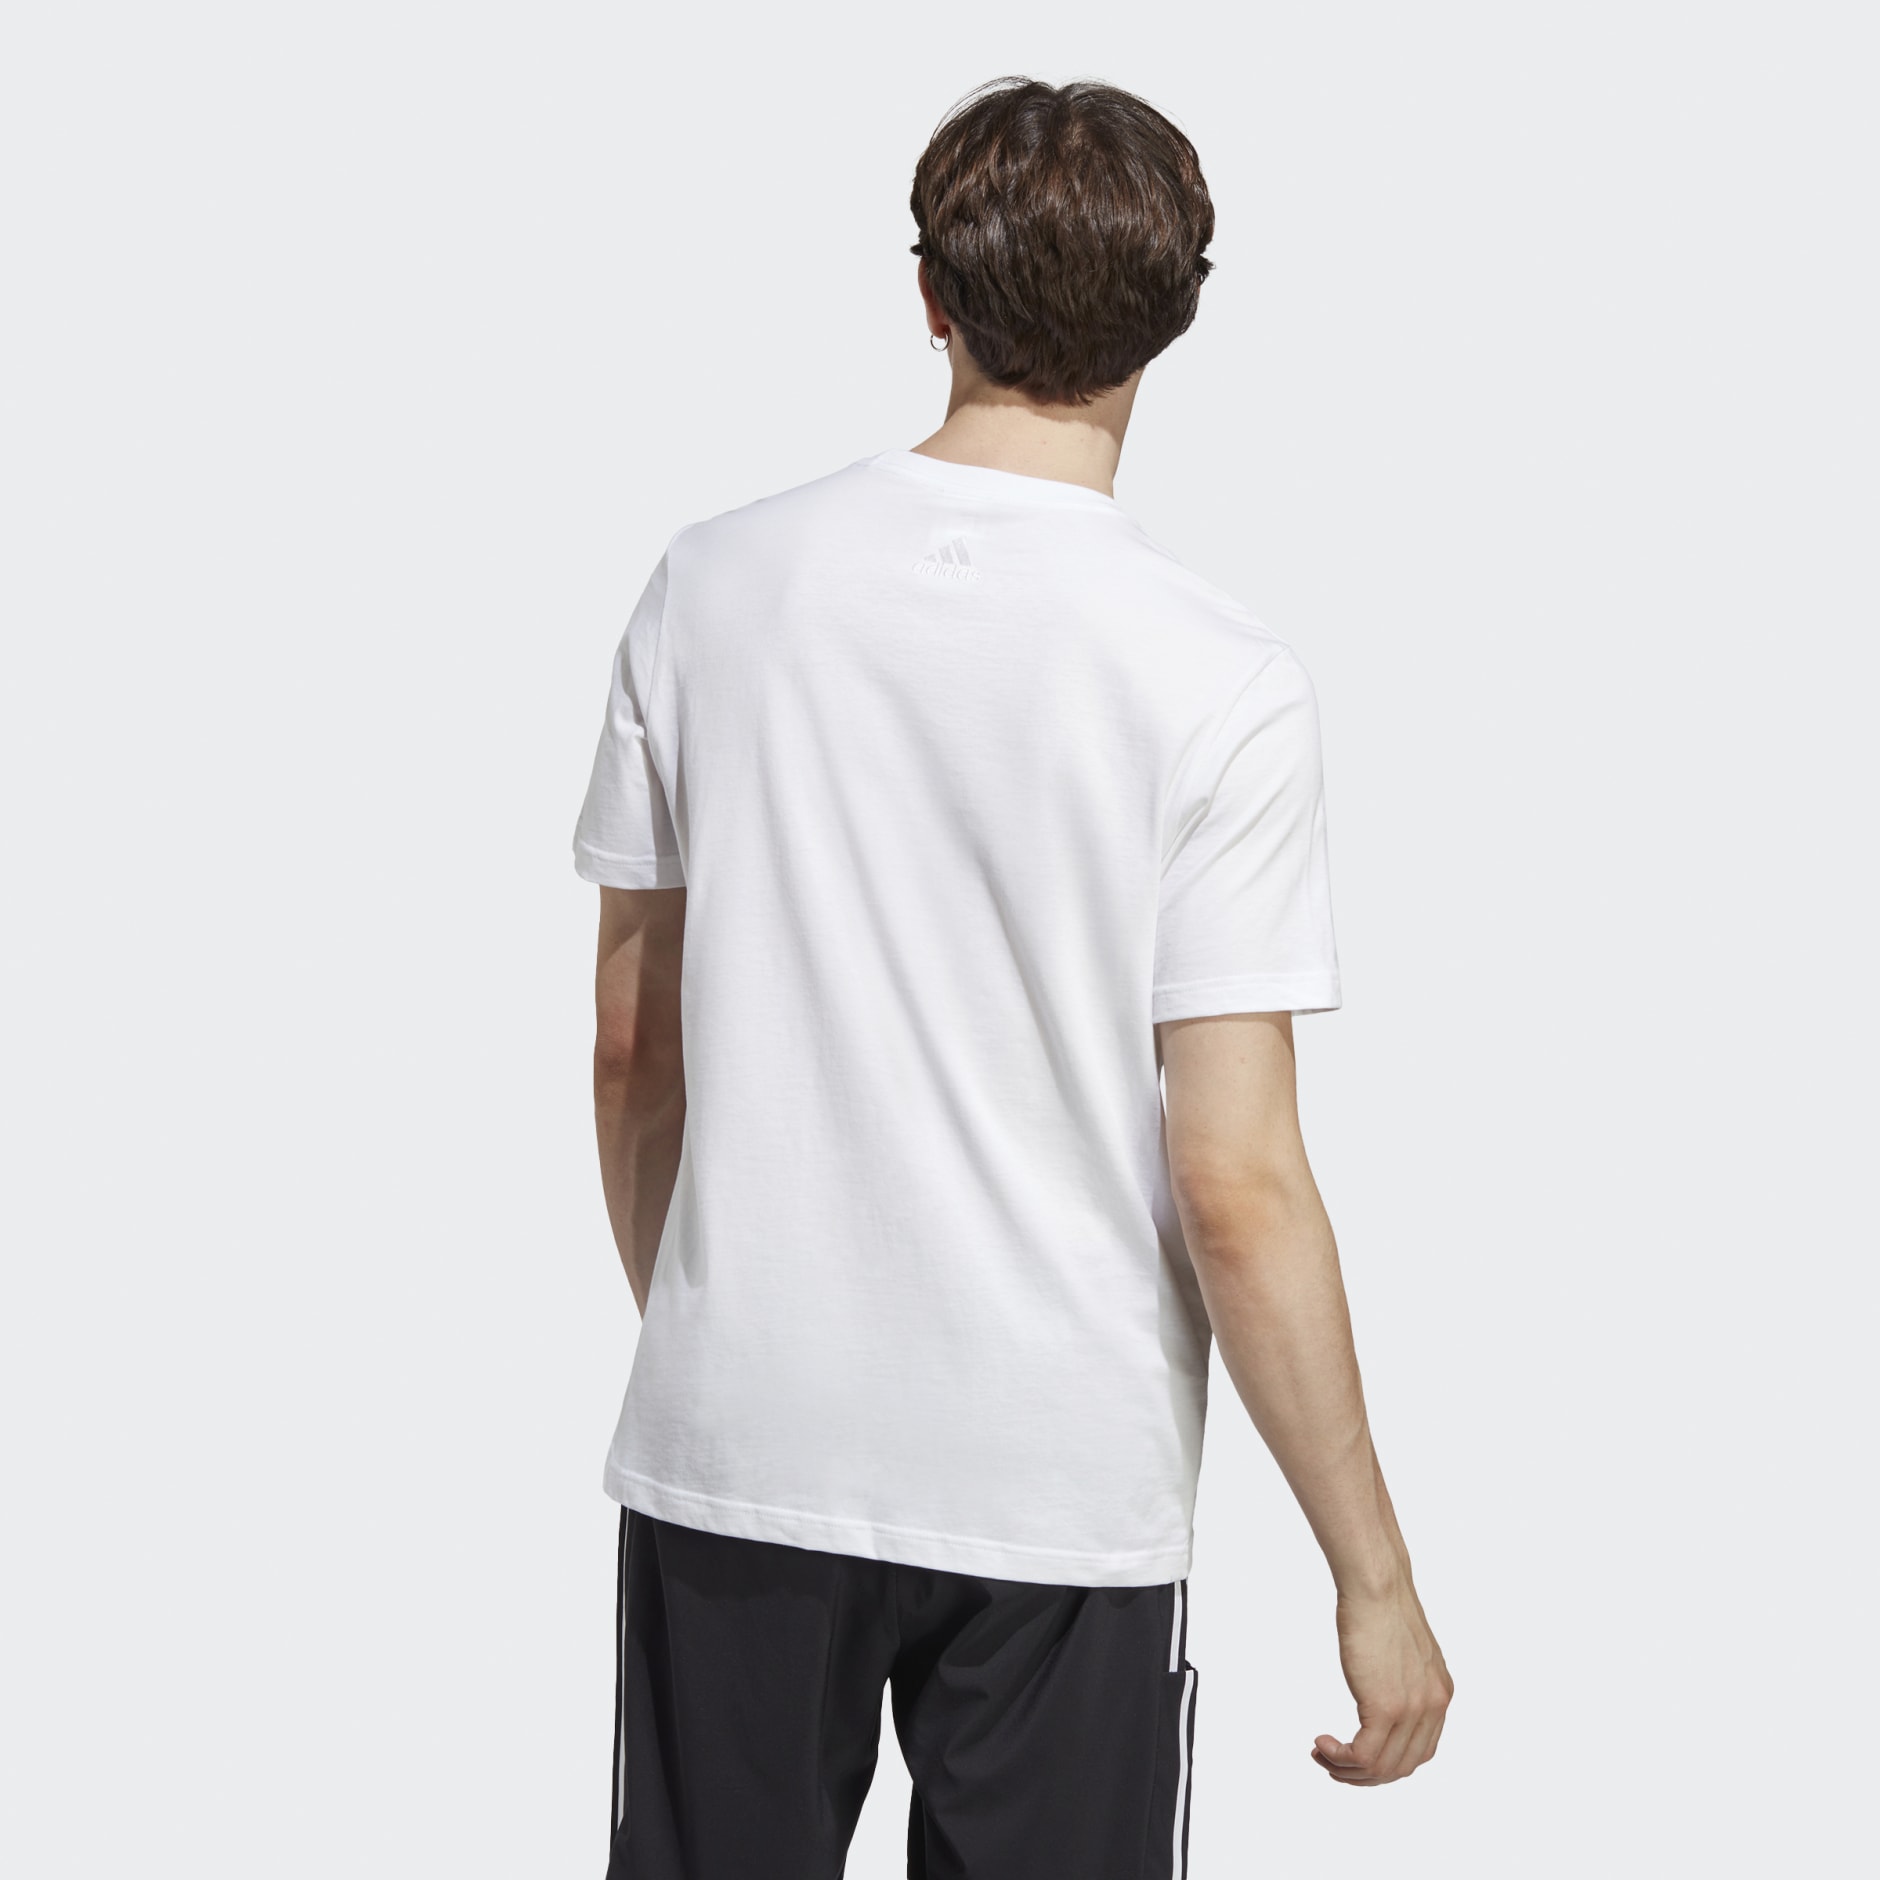 Logo Tee Single Linear adidas Embroidered - Jersey adidas | White Essentials GH